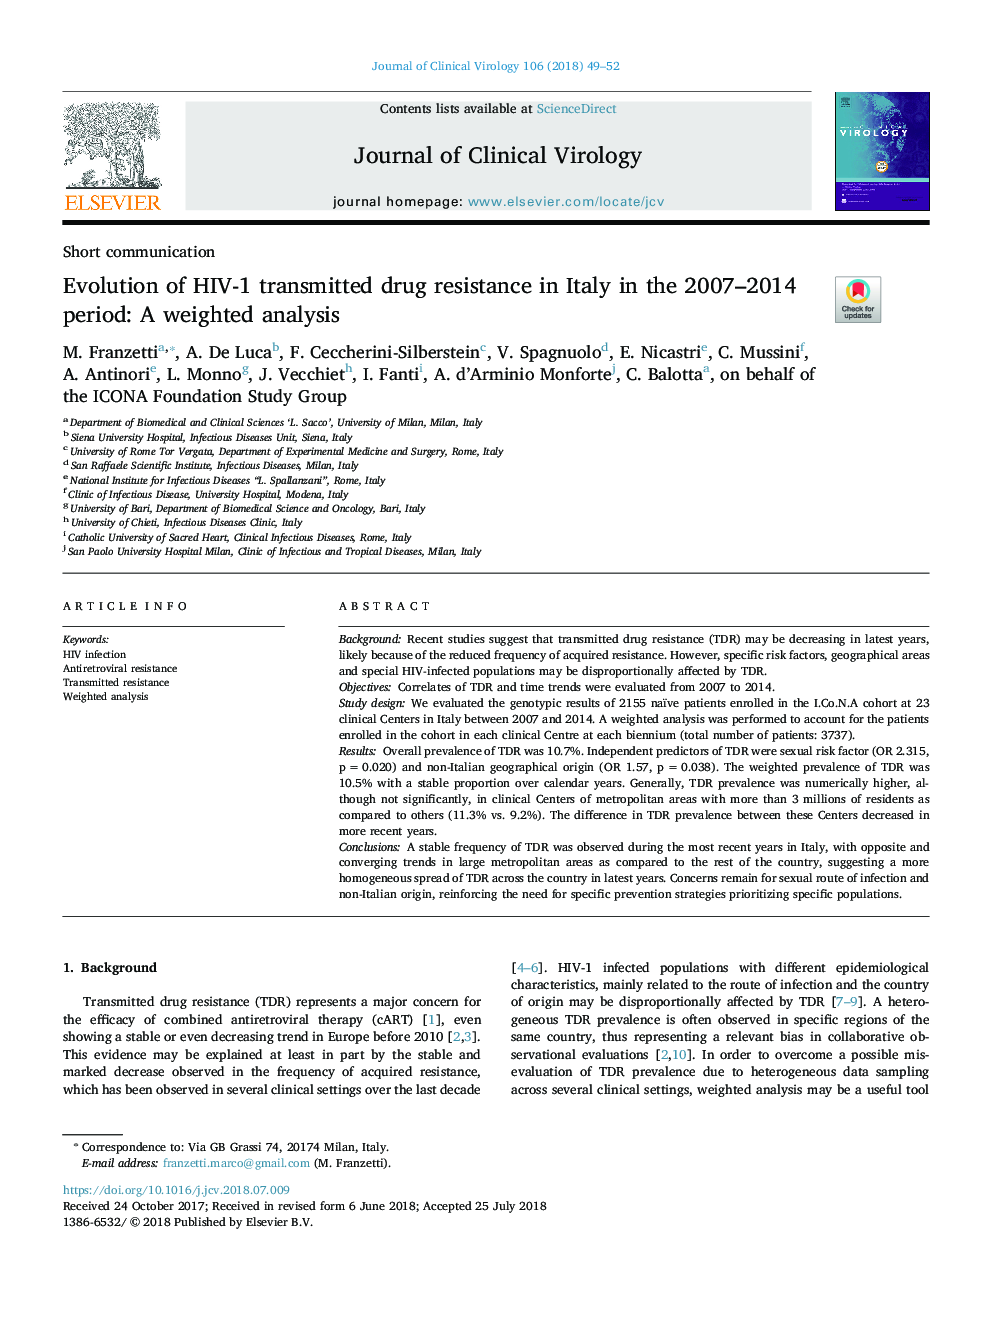 Evolution of HIV-1 transmitted drug resistance in Italy in the 2007-2014 period: A weighted analysis